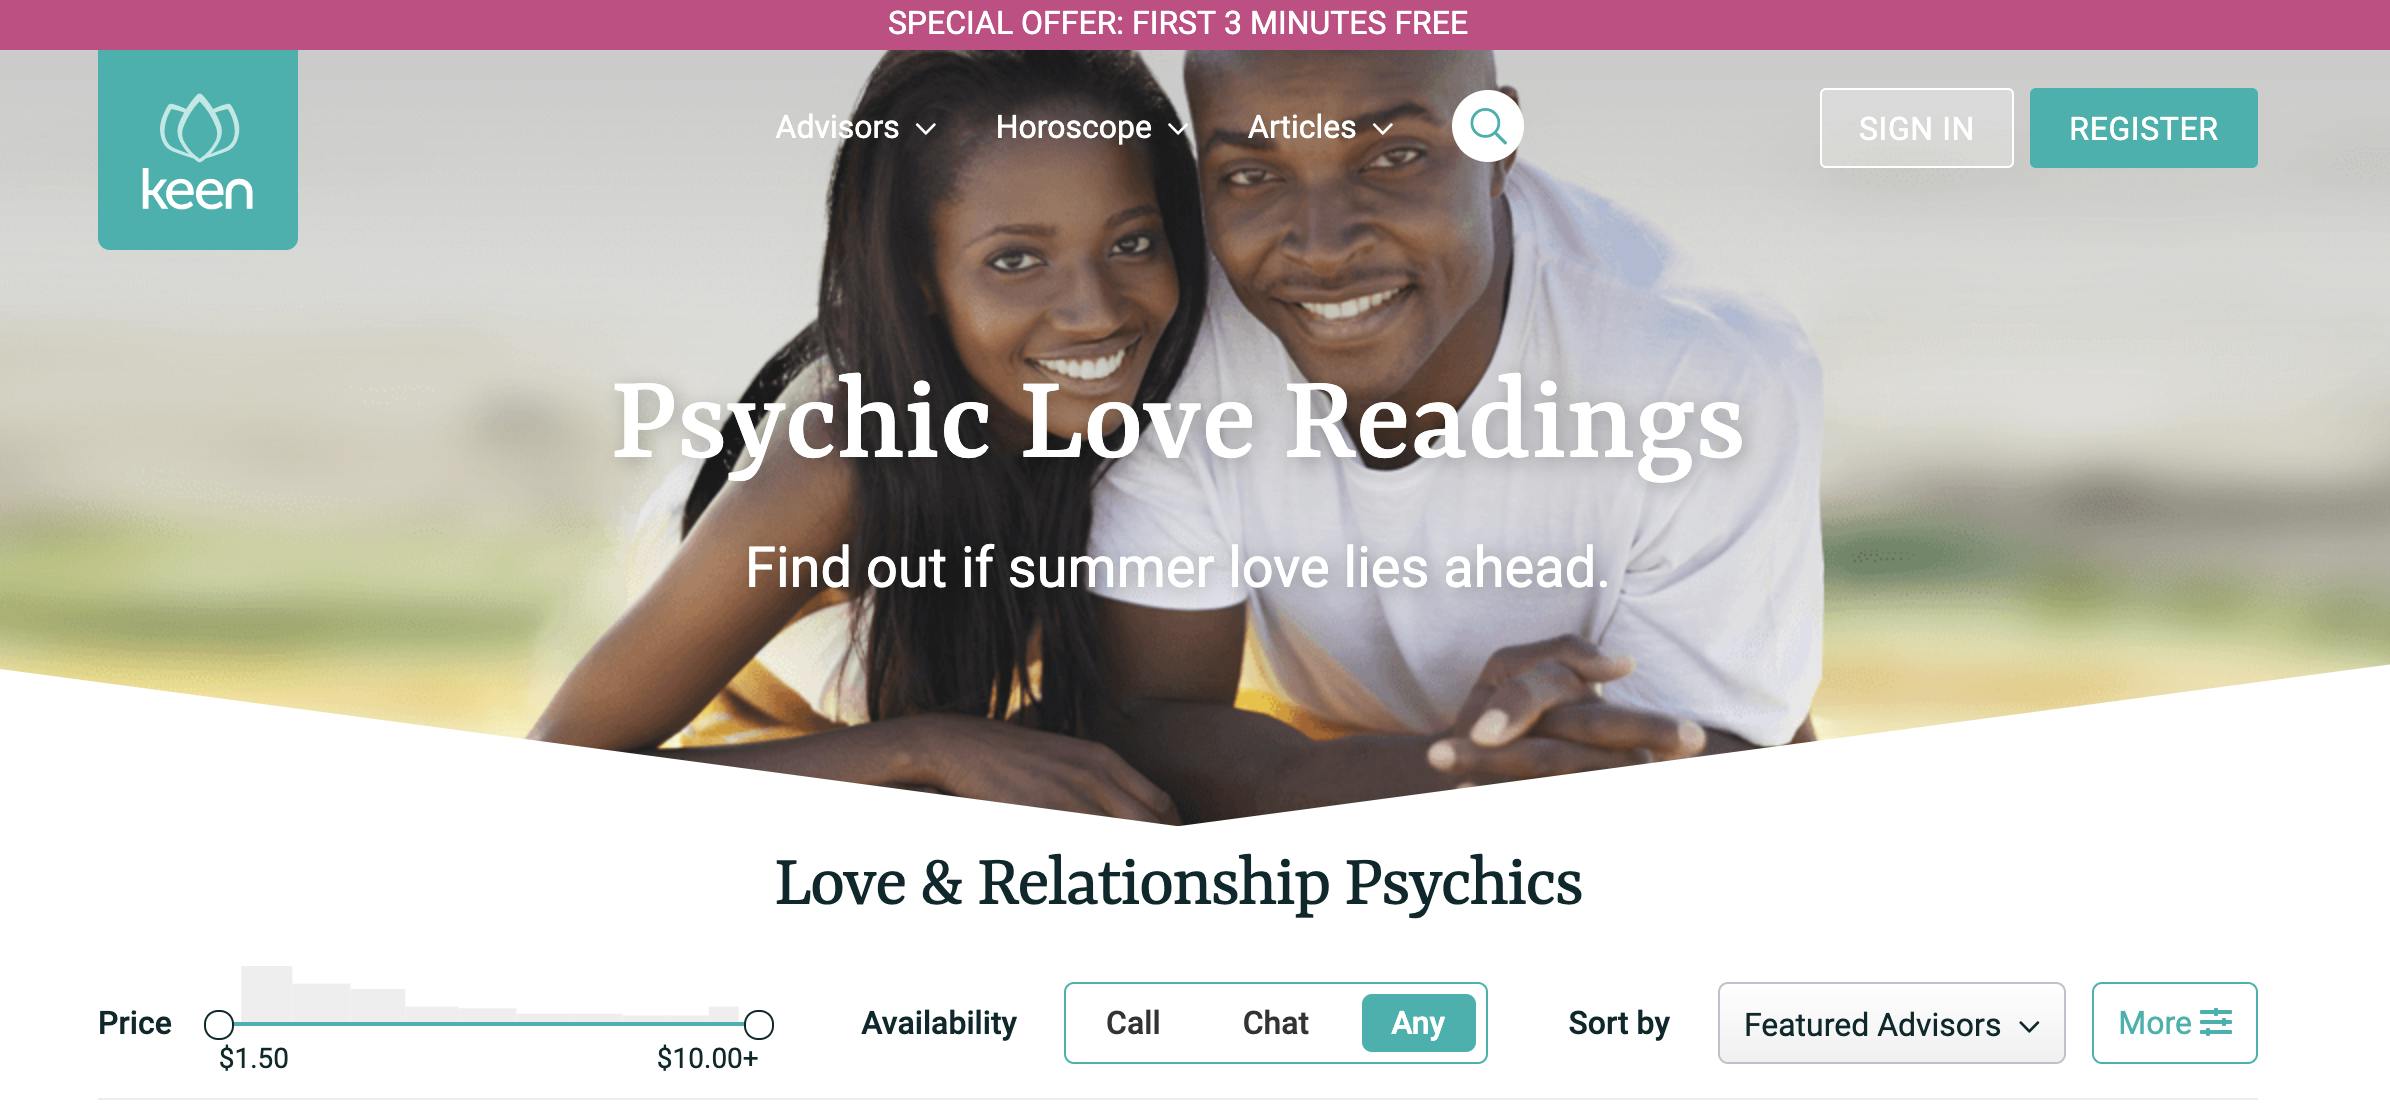 Psychic love reading chat